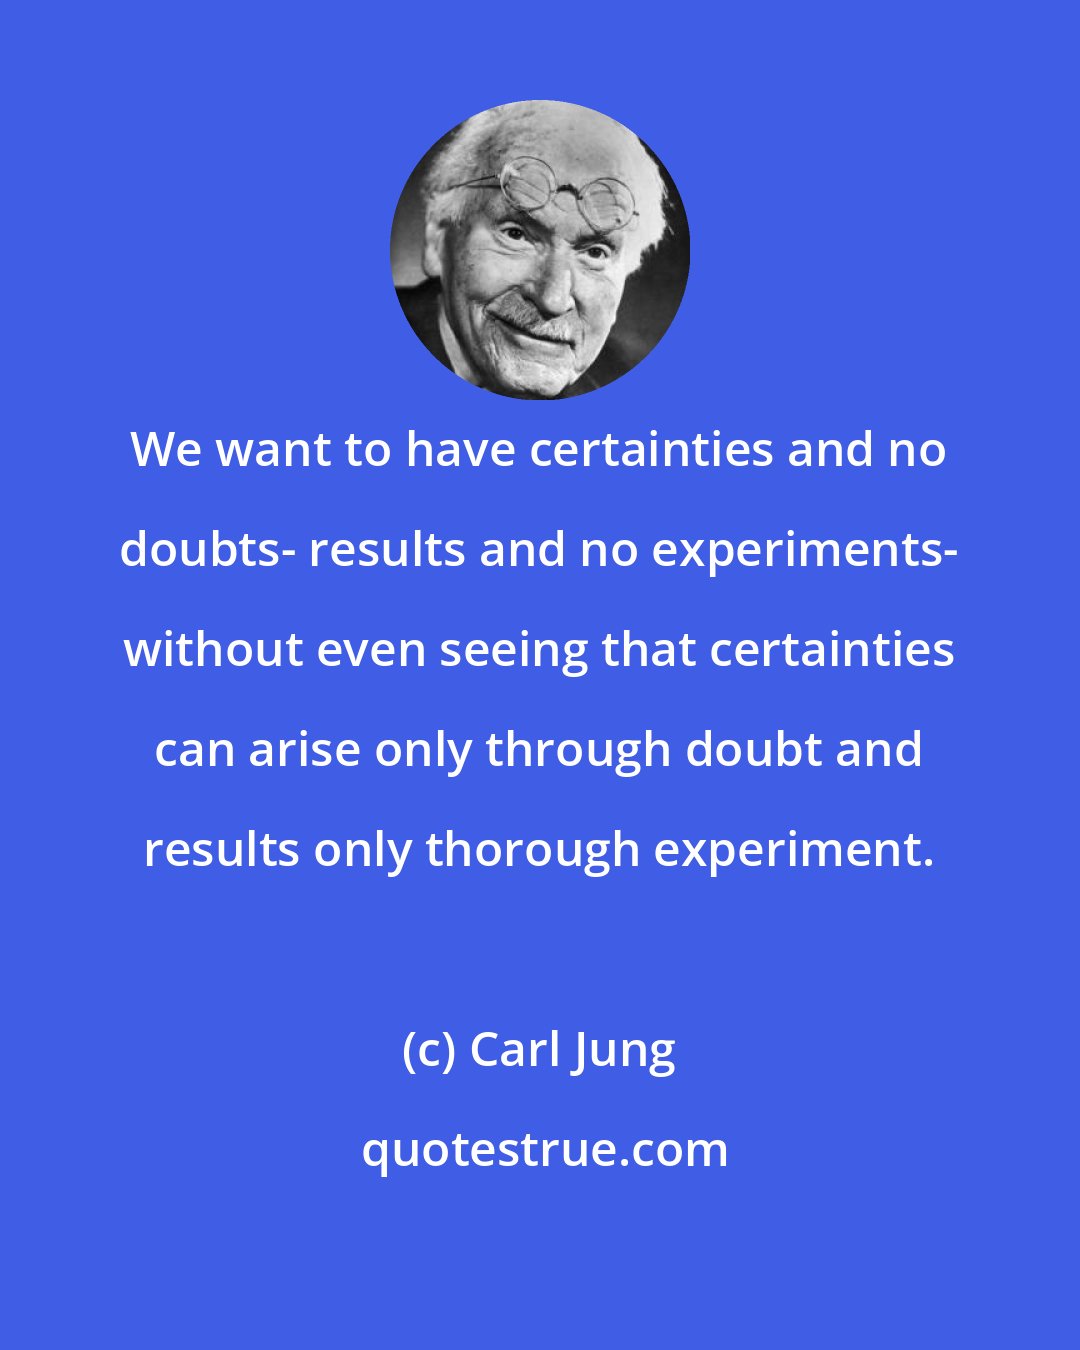 Carl Jung: We want to have certainties and no doubts- results and no experiments- without even seeing that certainties can arise only through doubt and results only thorough experiment.